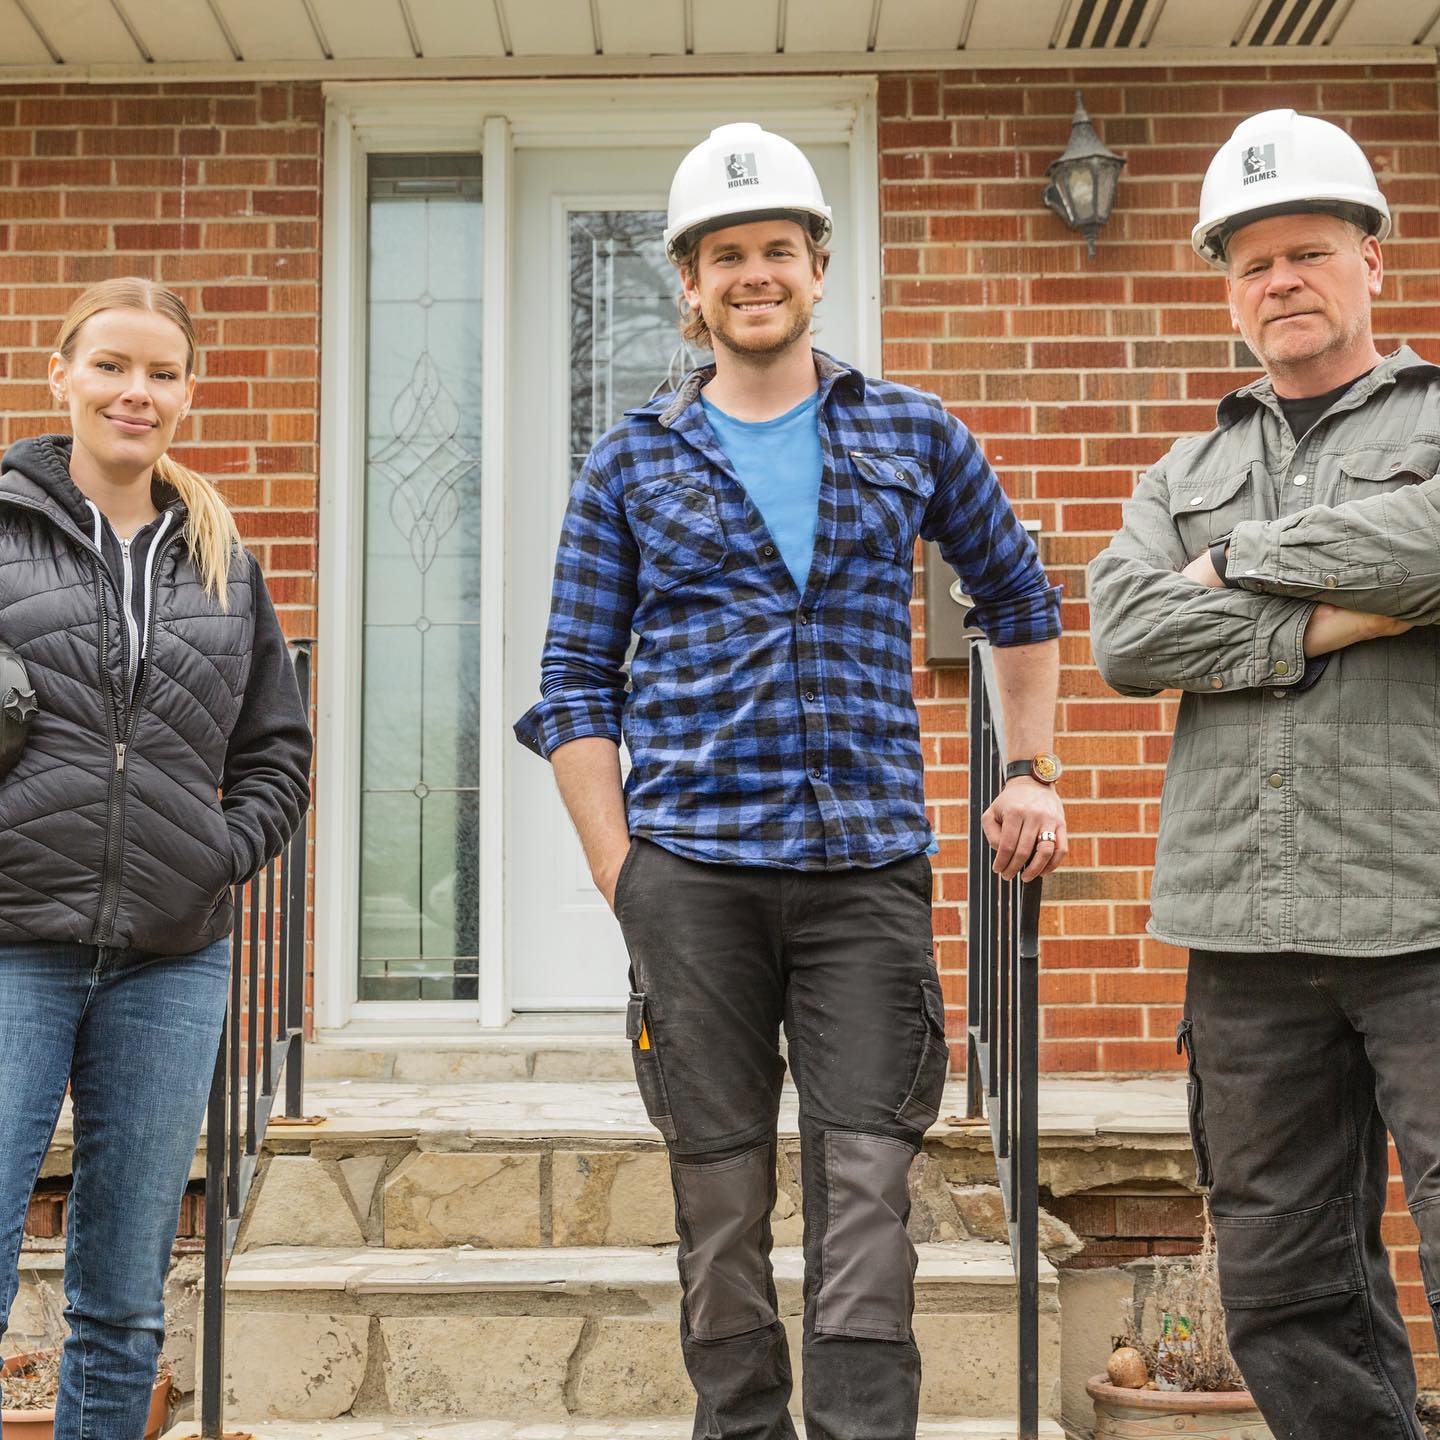 Holmes Family. Left to Right, Sherry Holmes, Mike Holmes Jr., and Mike Holmes